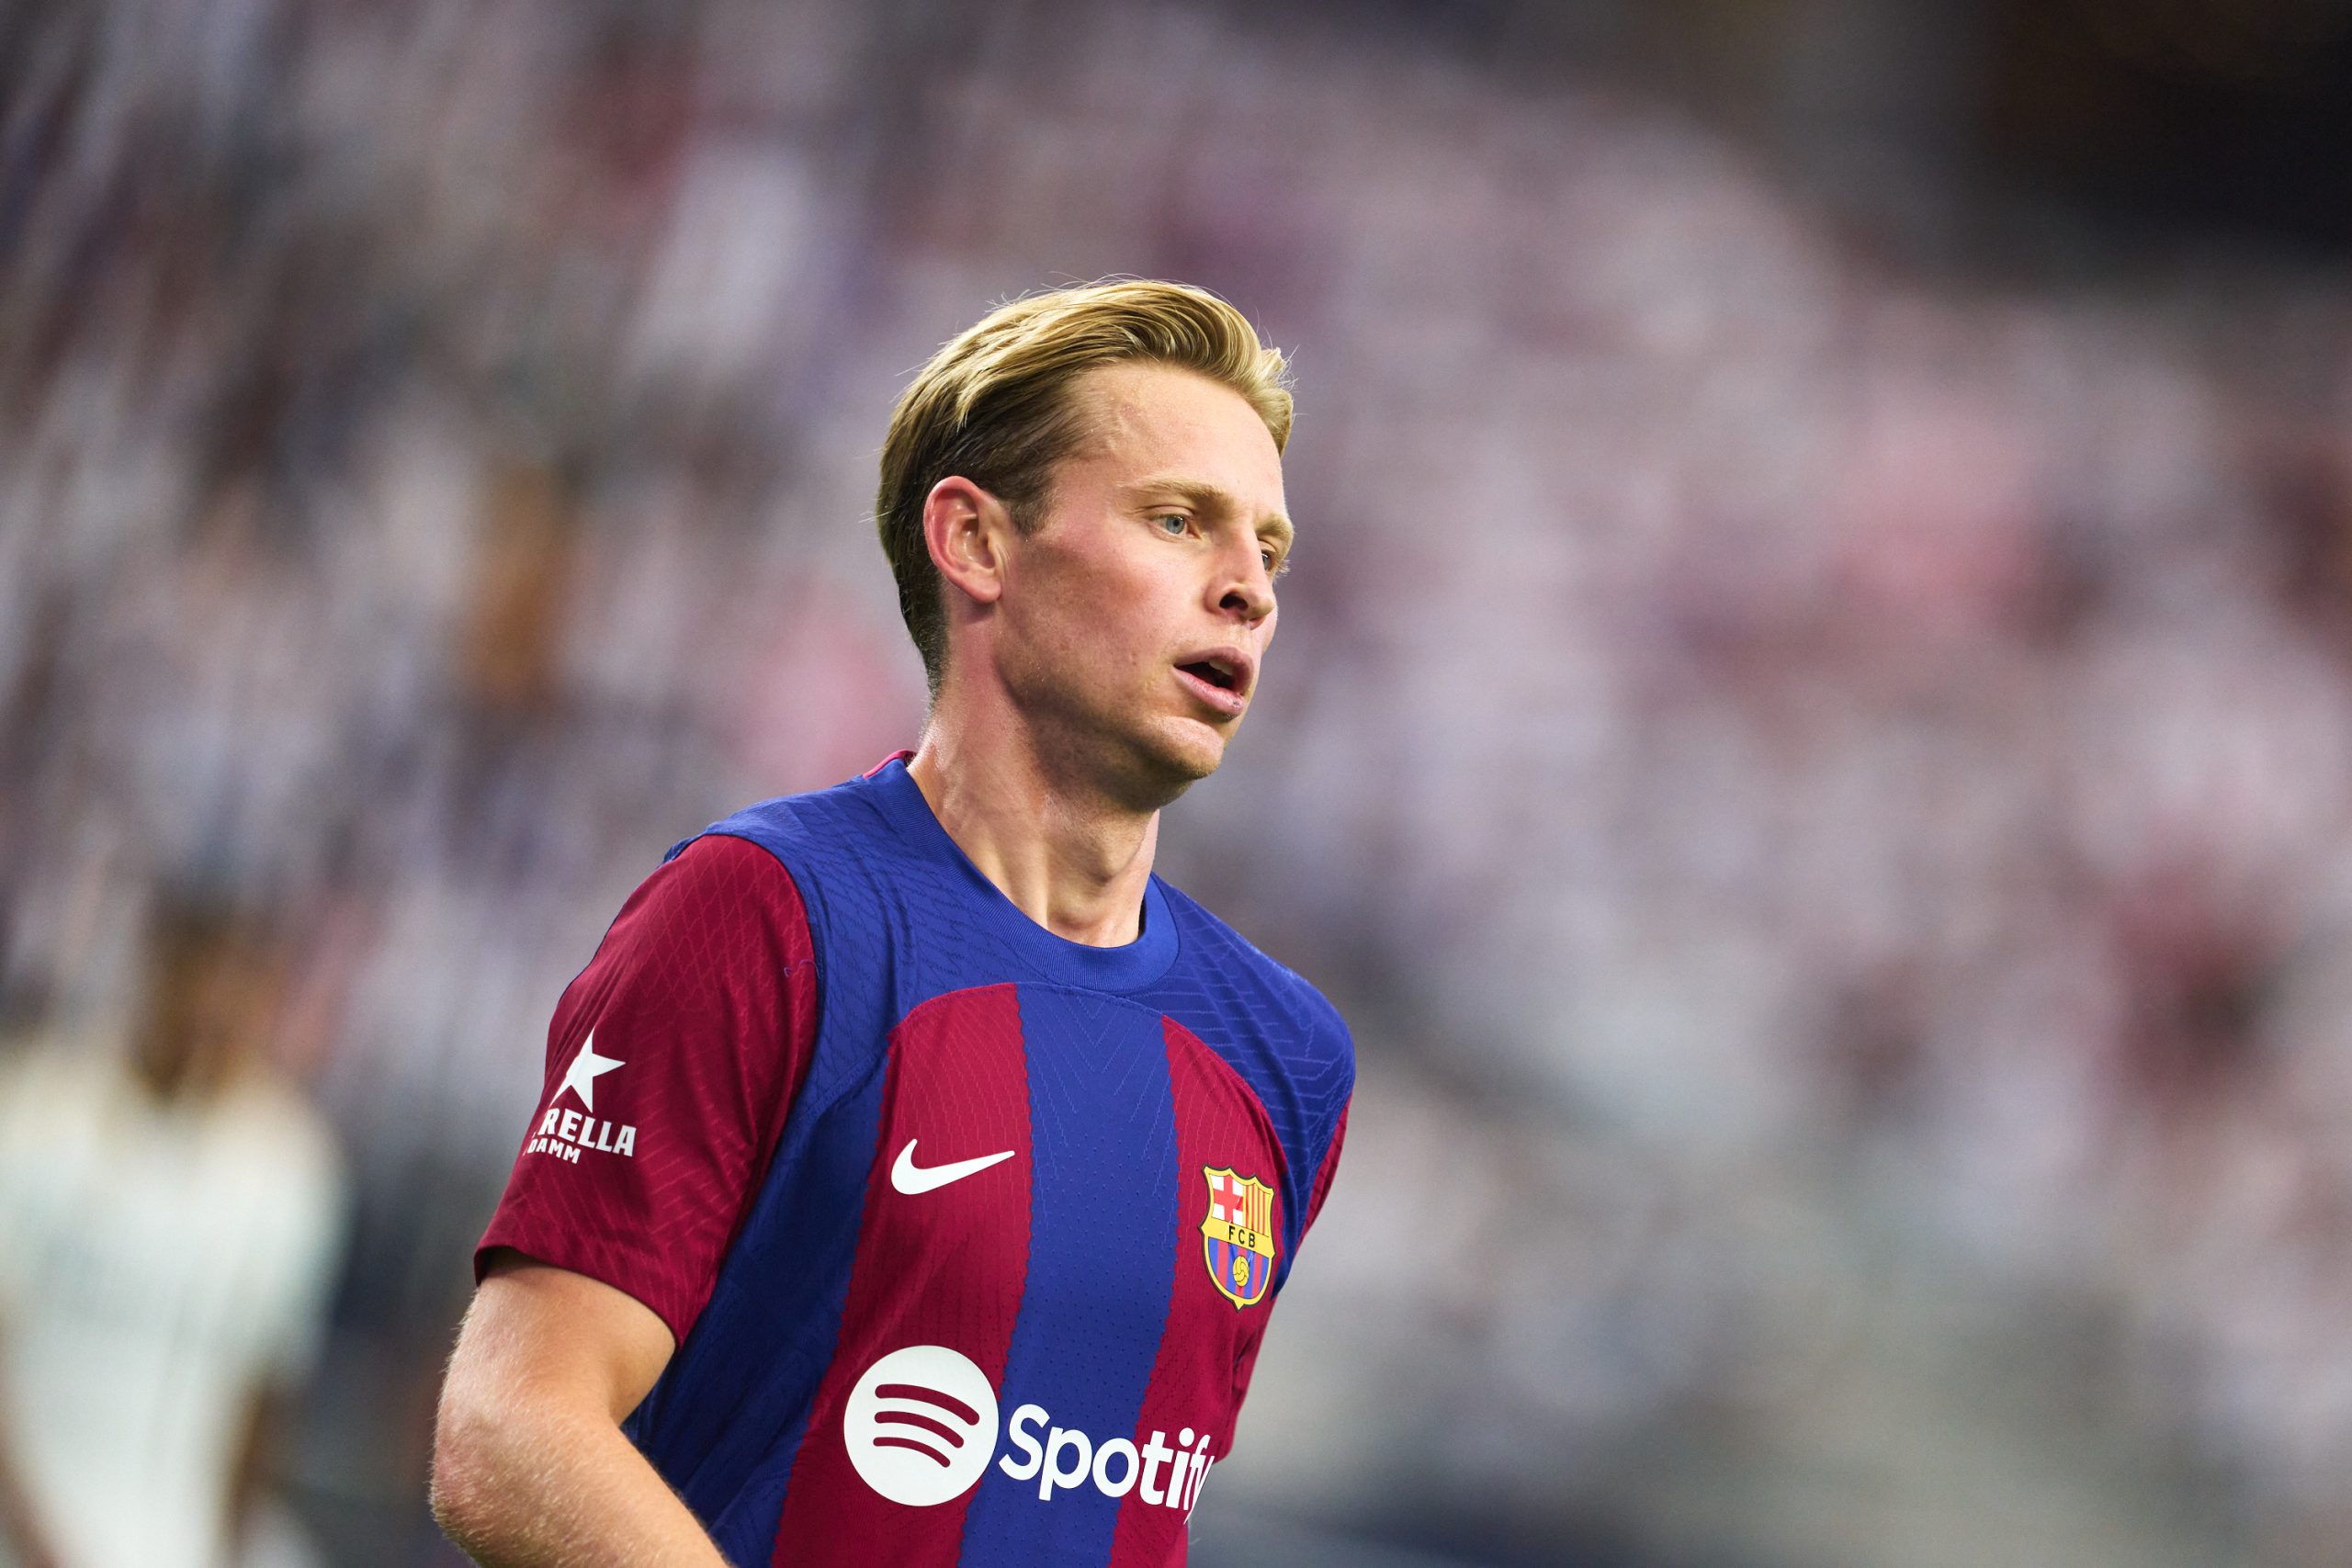 Barcelona’s record without Frenkie de Jong does not make for great reading